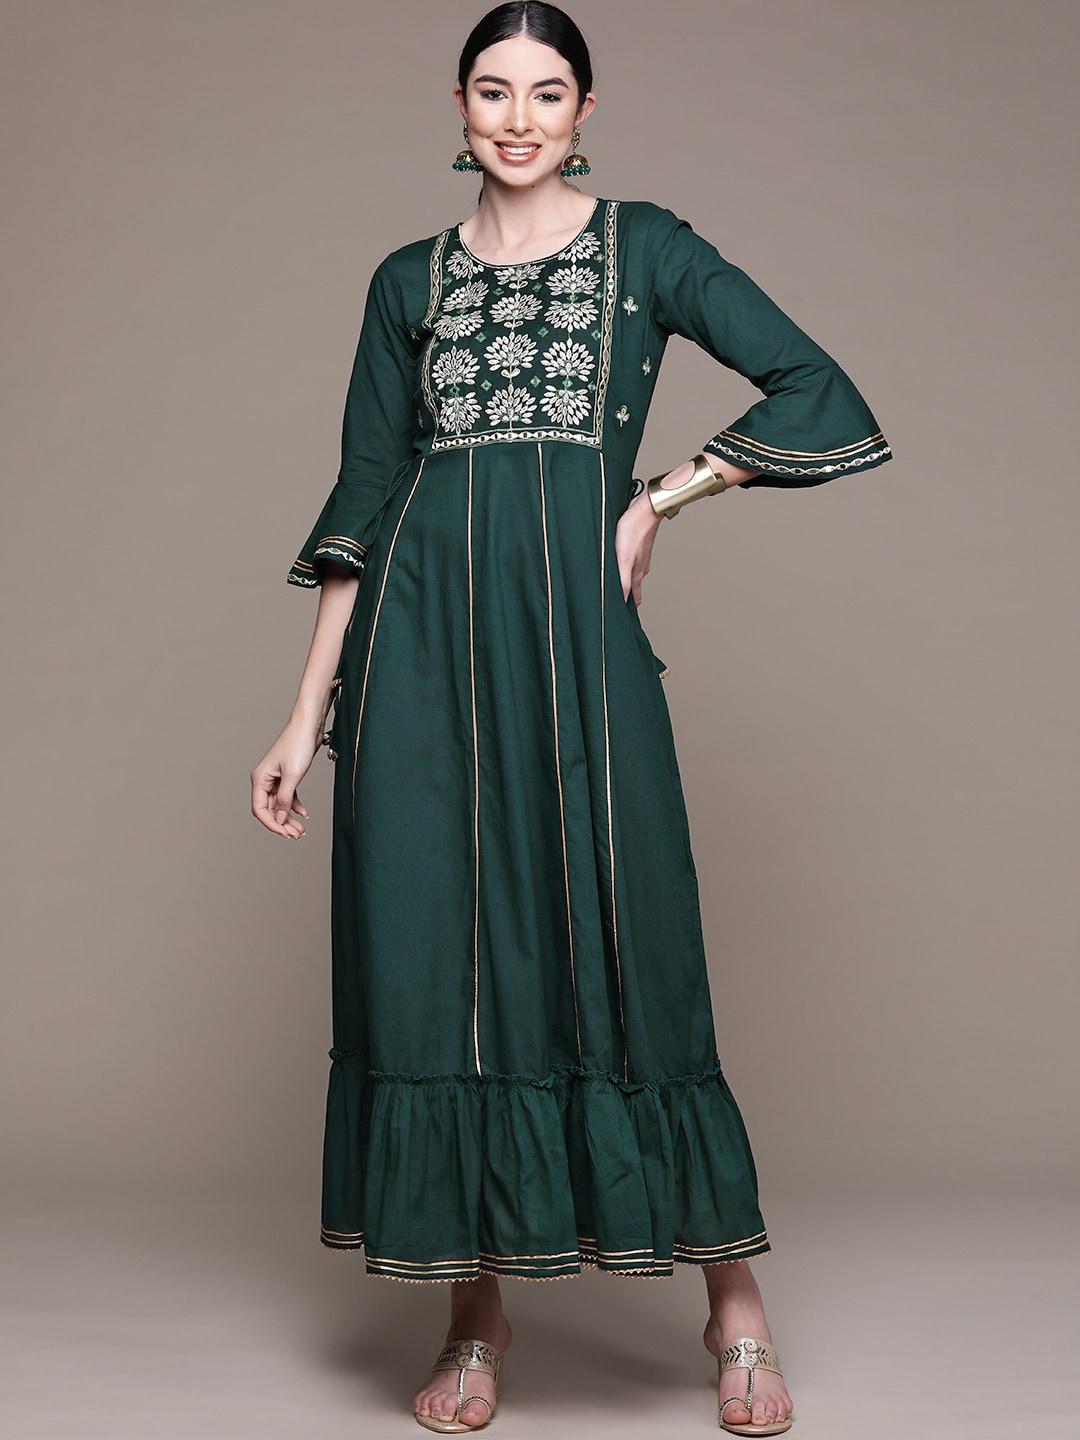 anubhutee-green-embellished-embroidered-ethnic-cotton-a-line-maxi-dress